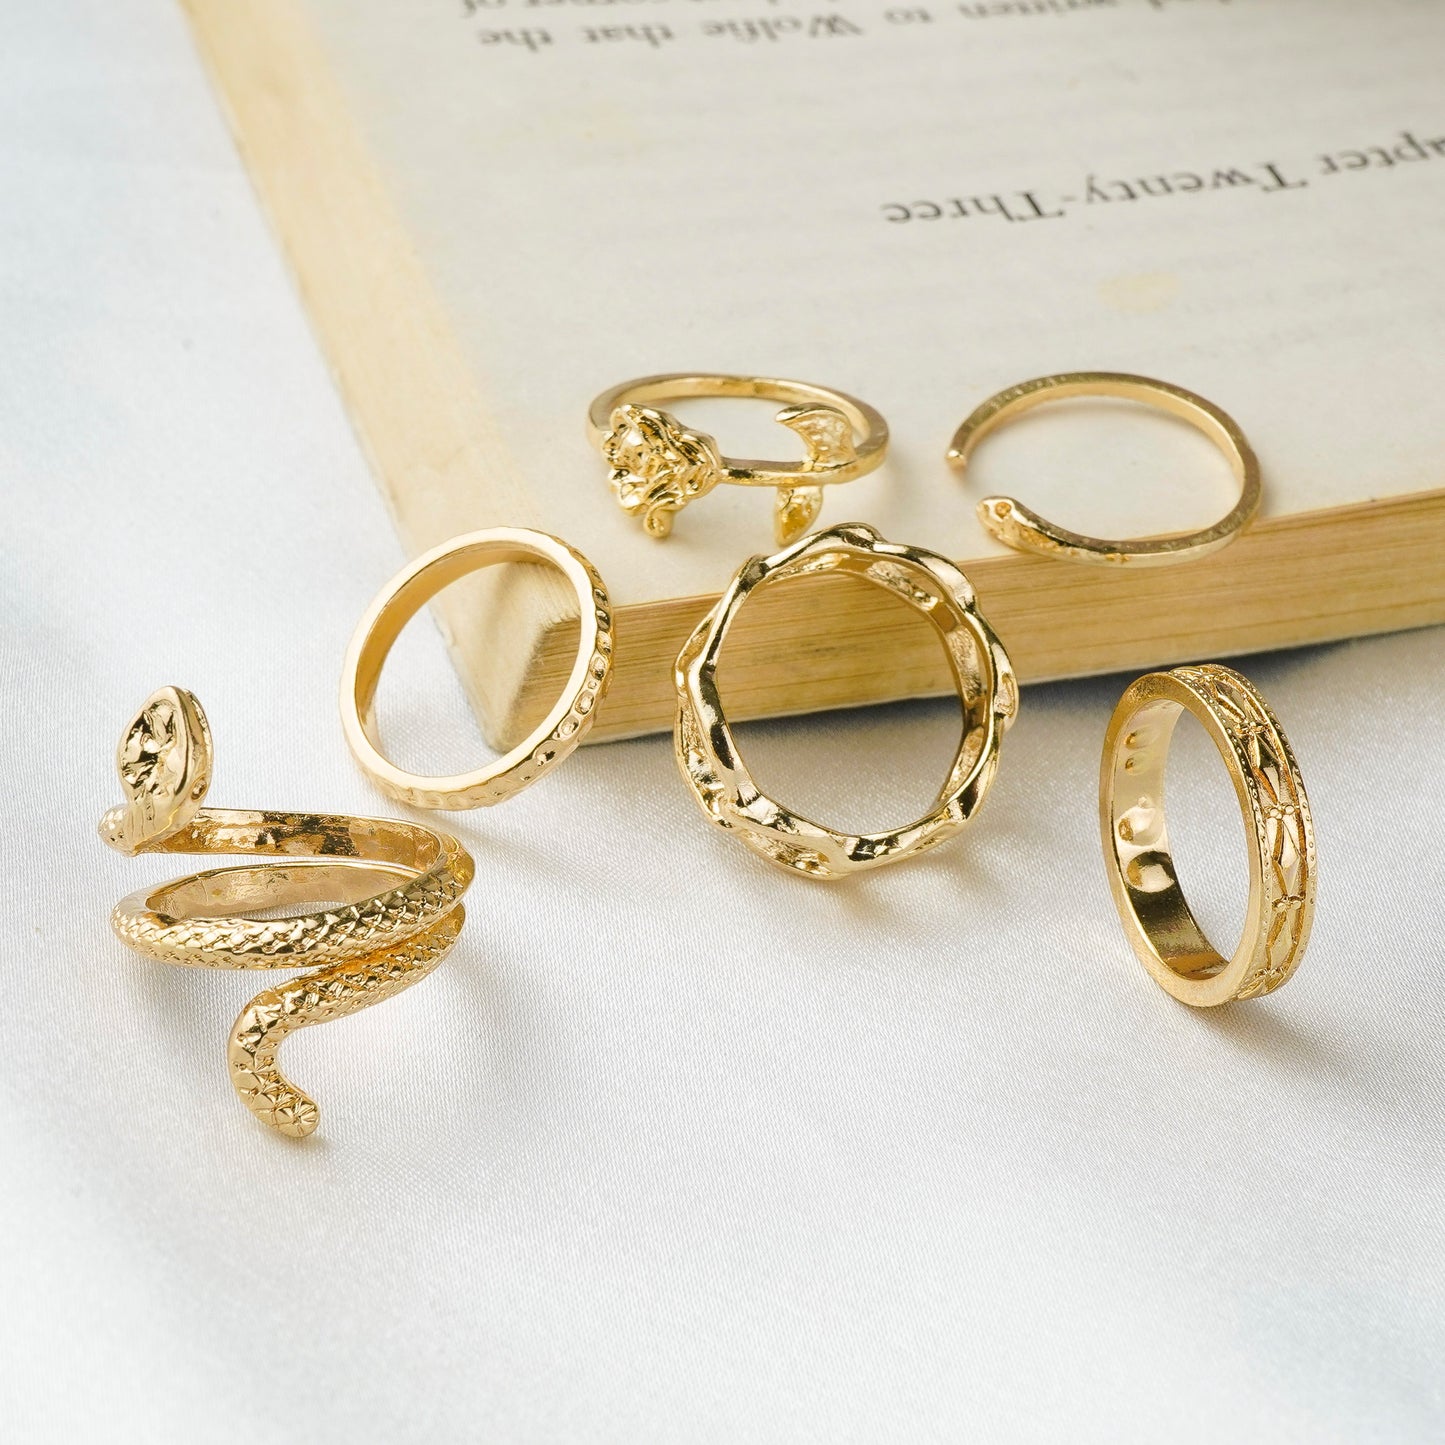 Trendy Set Ring For Fashionable Women(Code:R54)